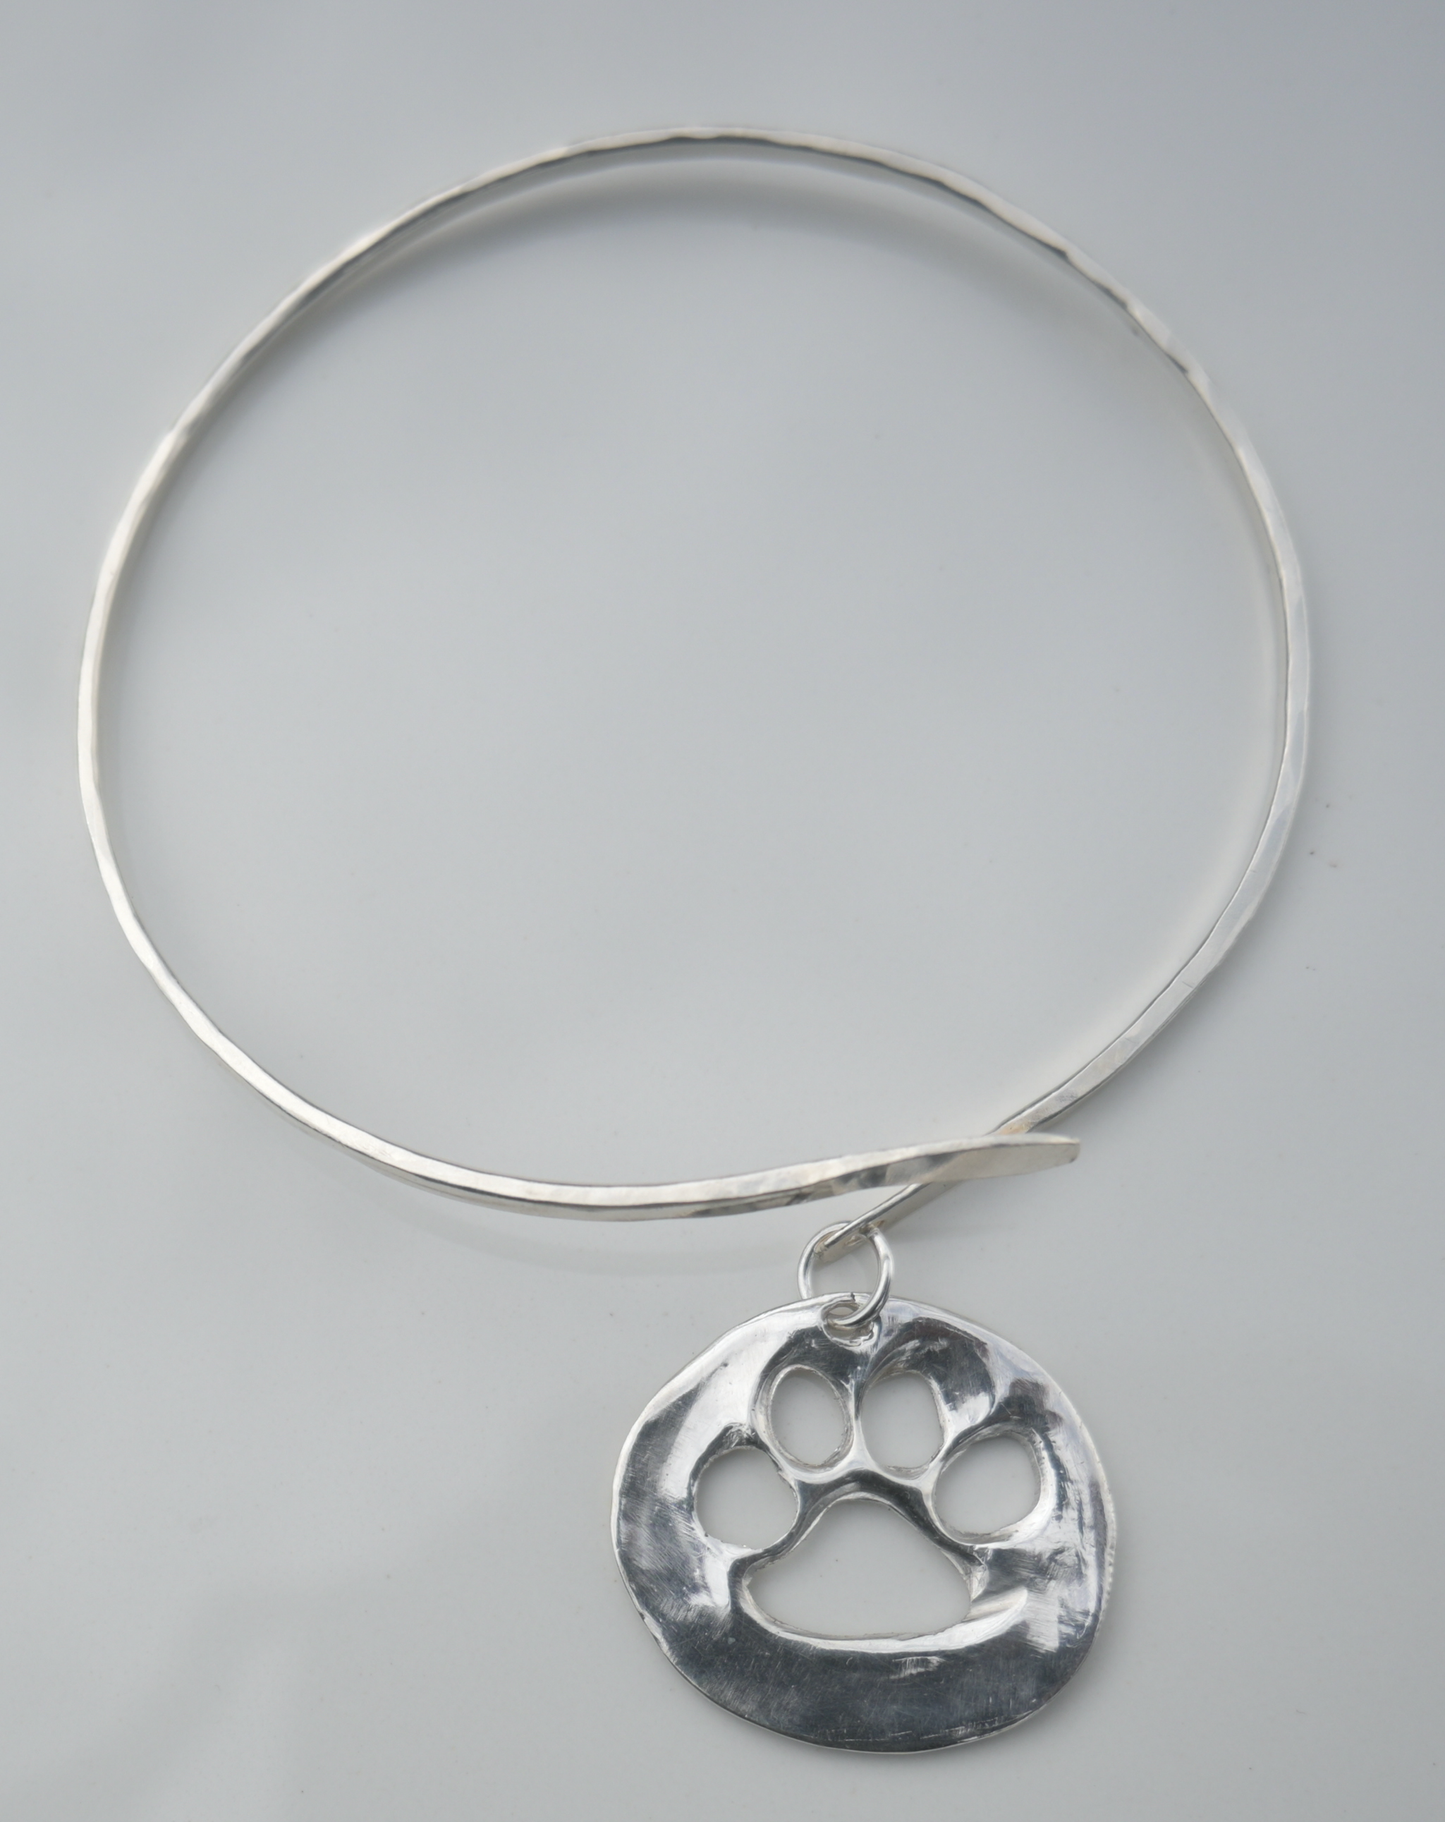 Artisan Crafted Fine Silver .999 (pure silver)Bangle Bracelet “Paws Up”